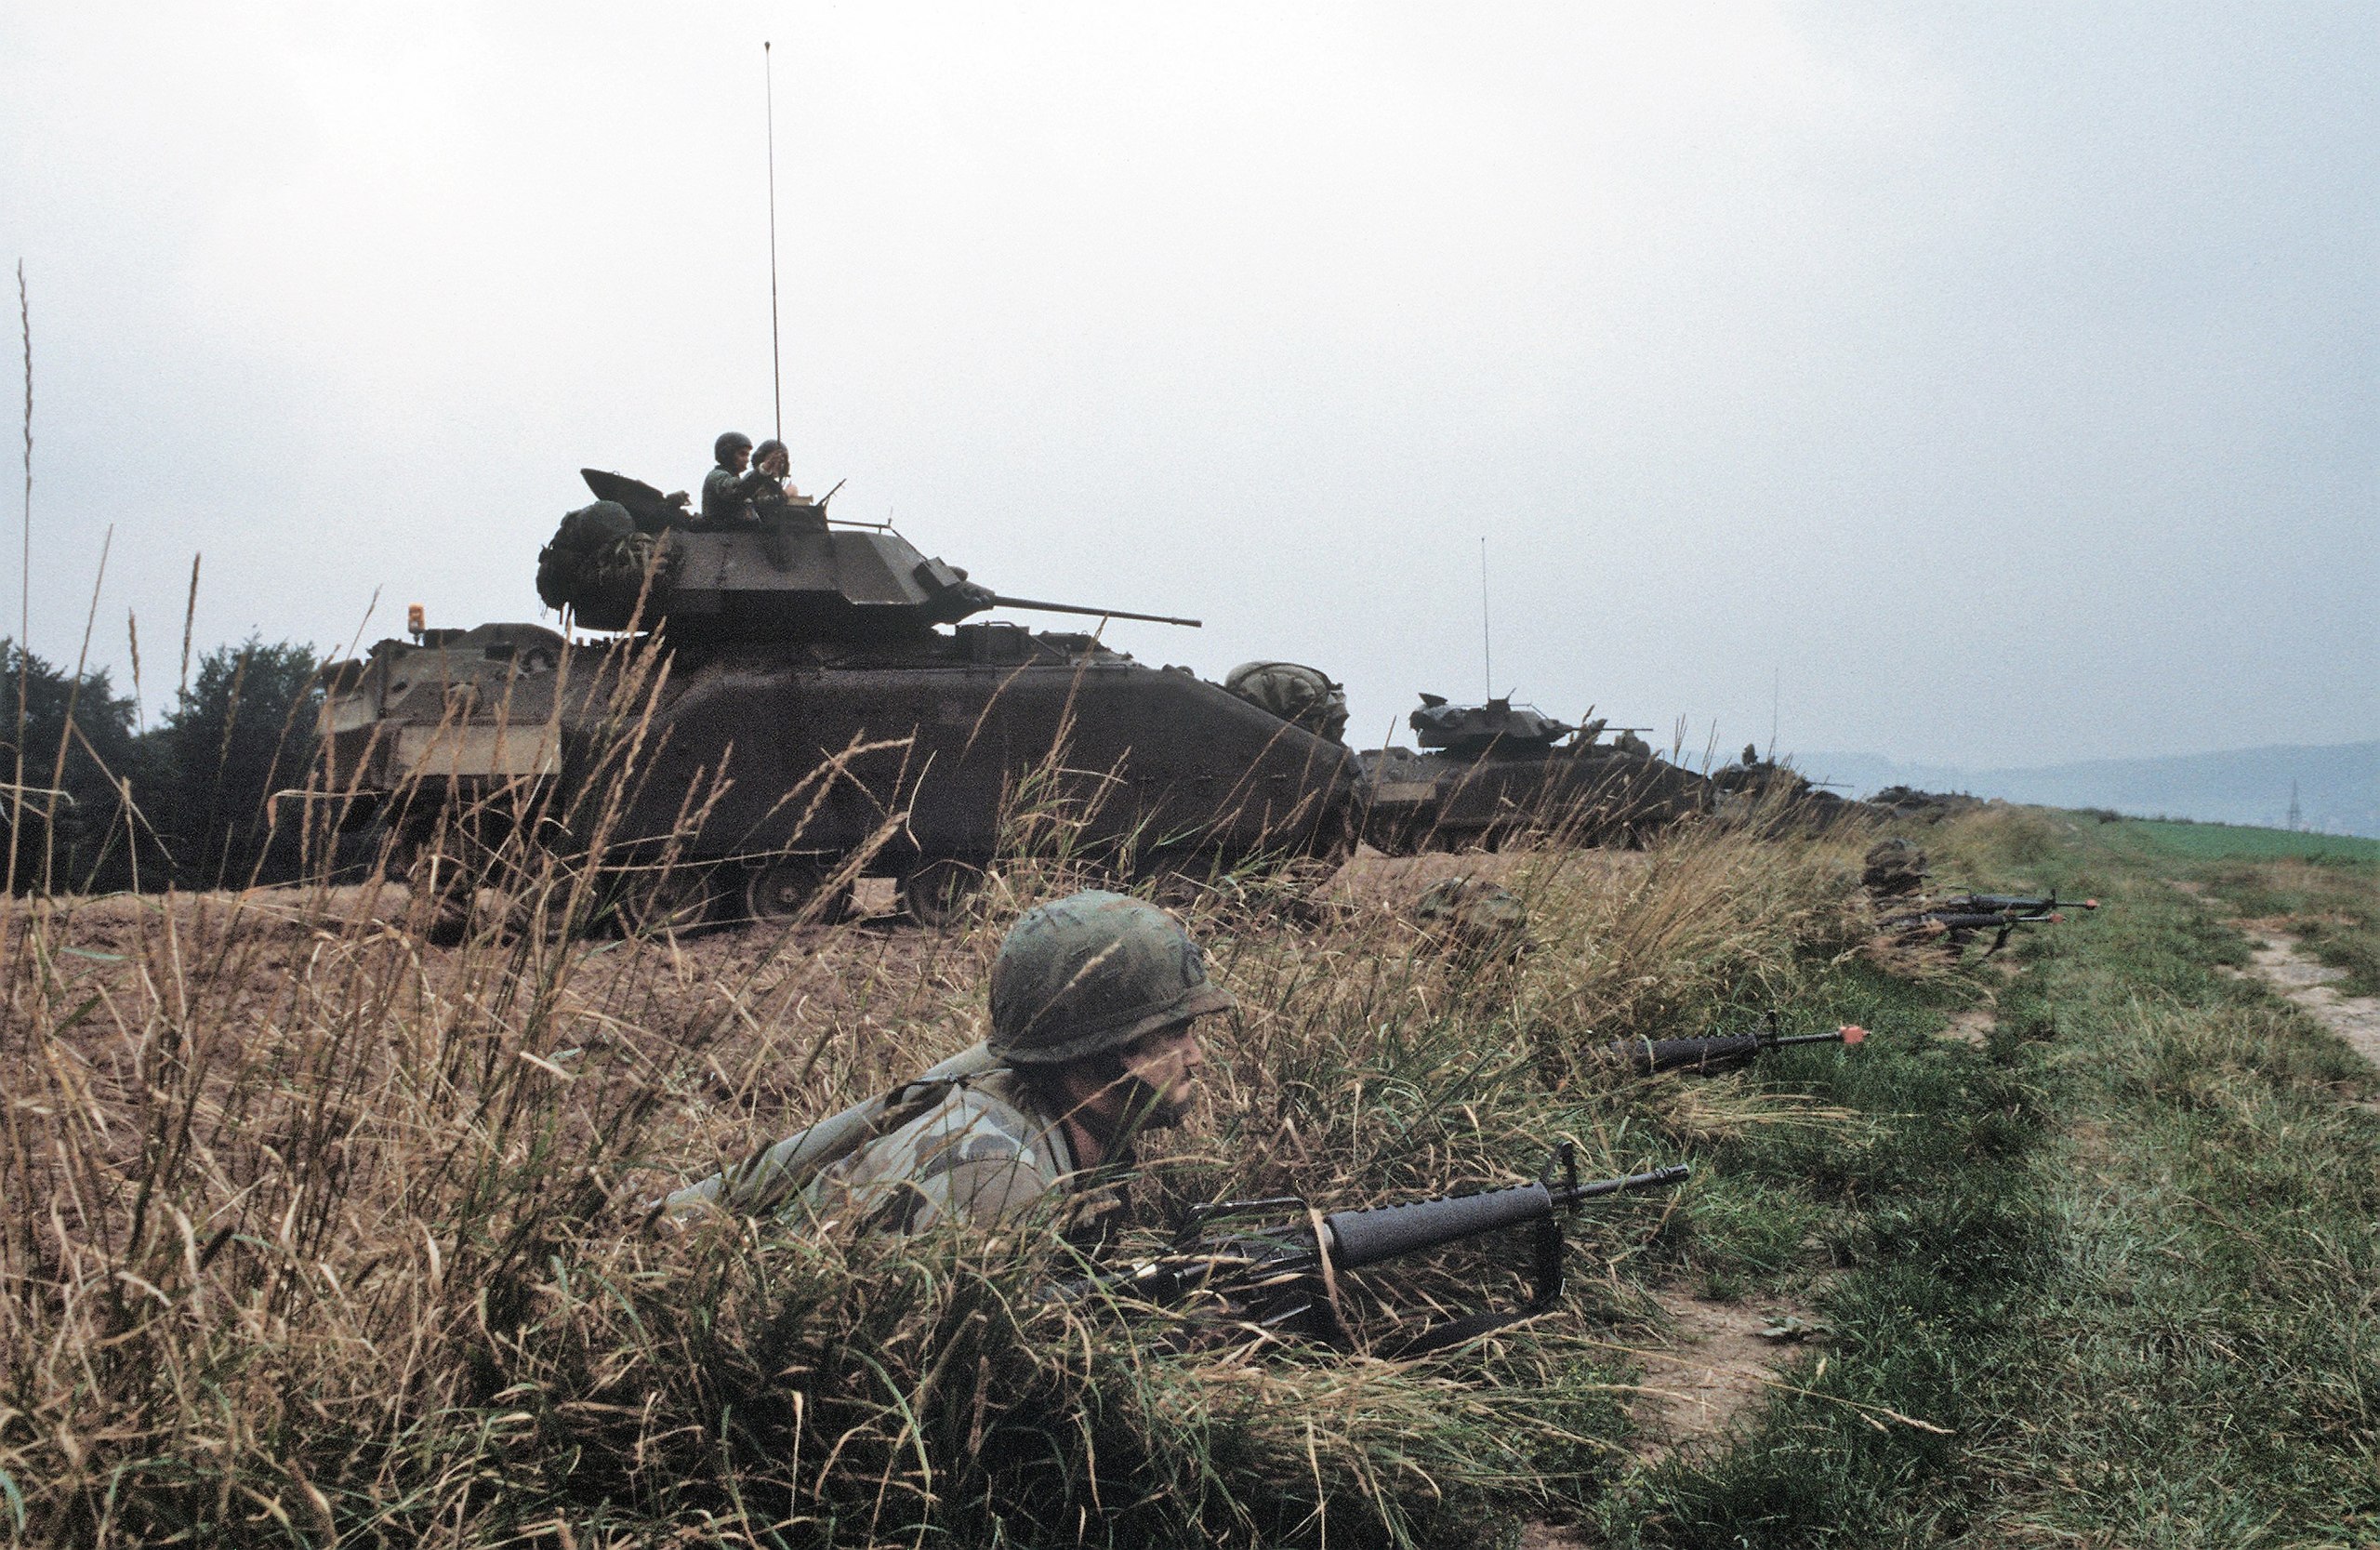 2560px-DA-ST-86-00224_Three_M2_Bradley_advance_through_a_wooded_area_during_Exercise_REFORGER_...jpg